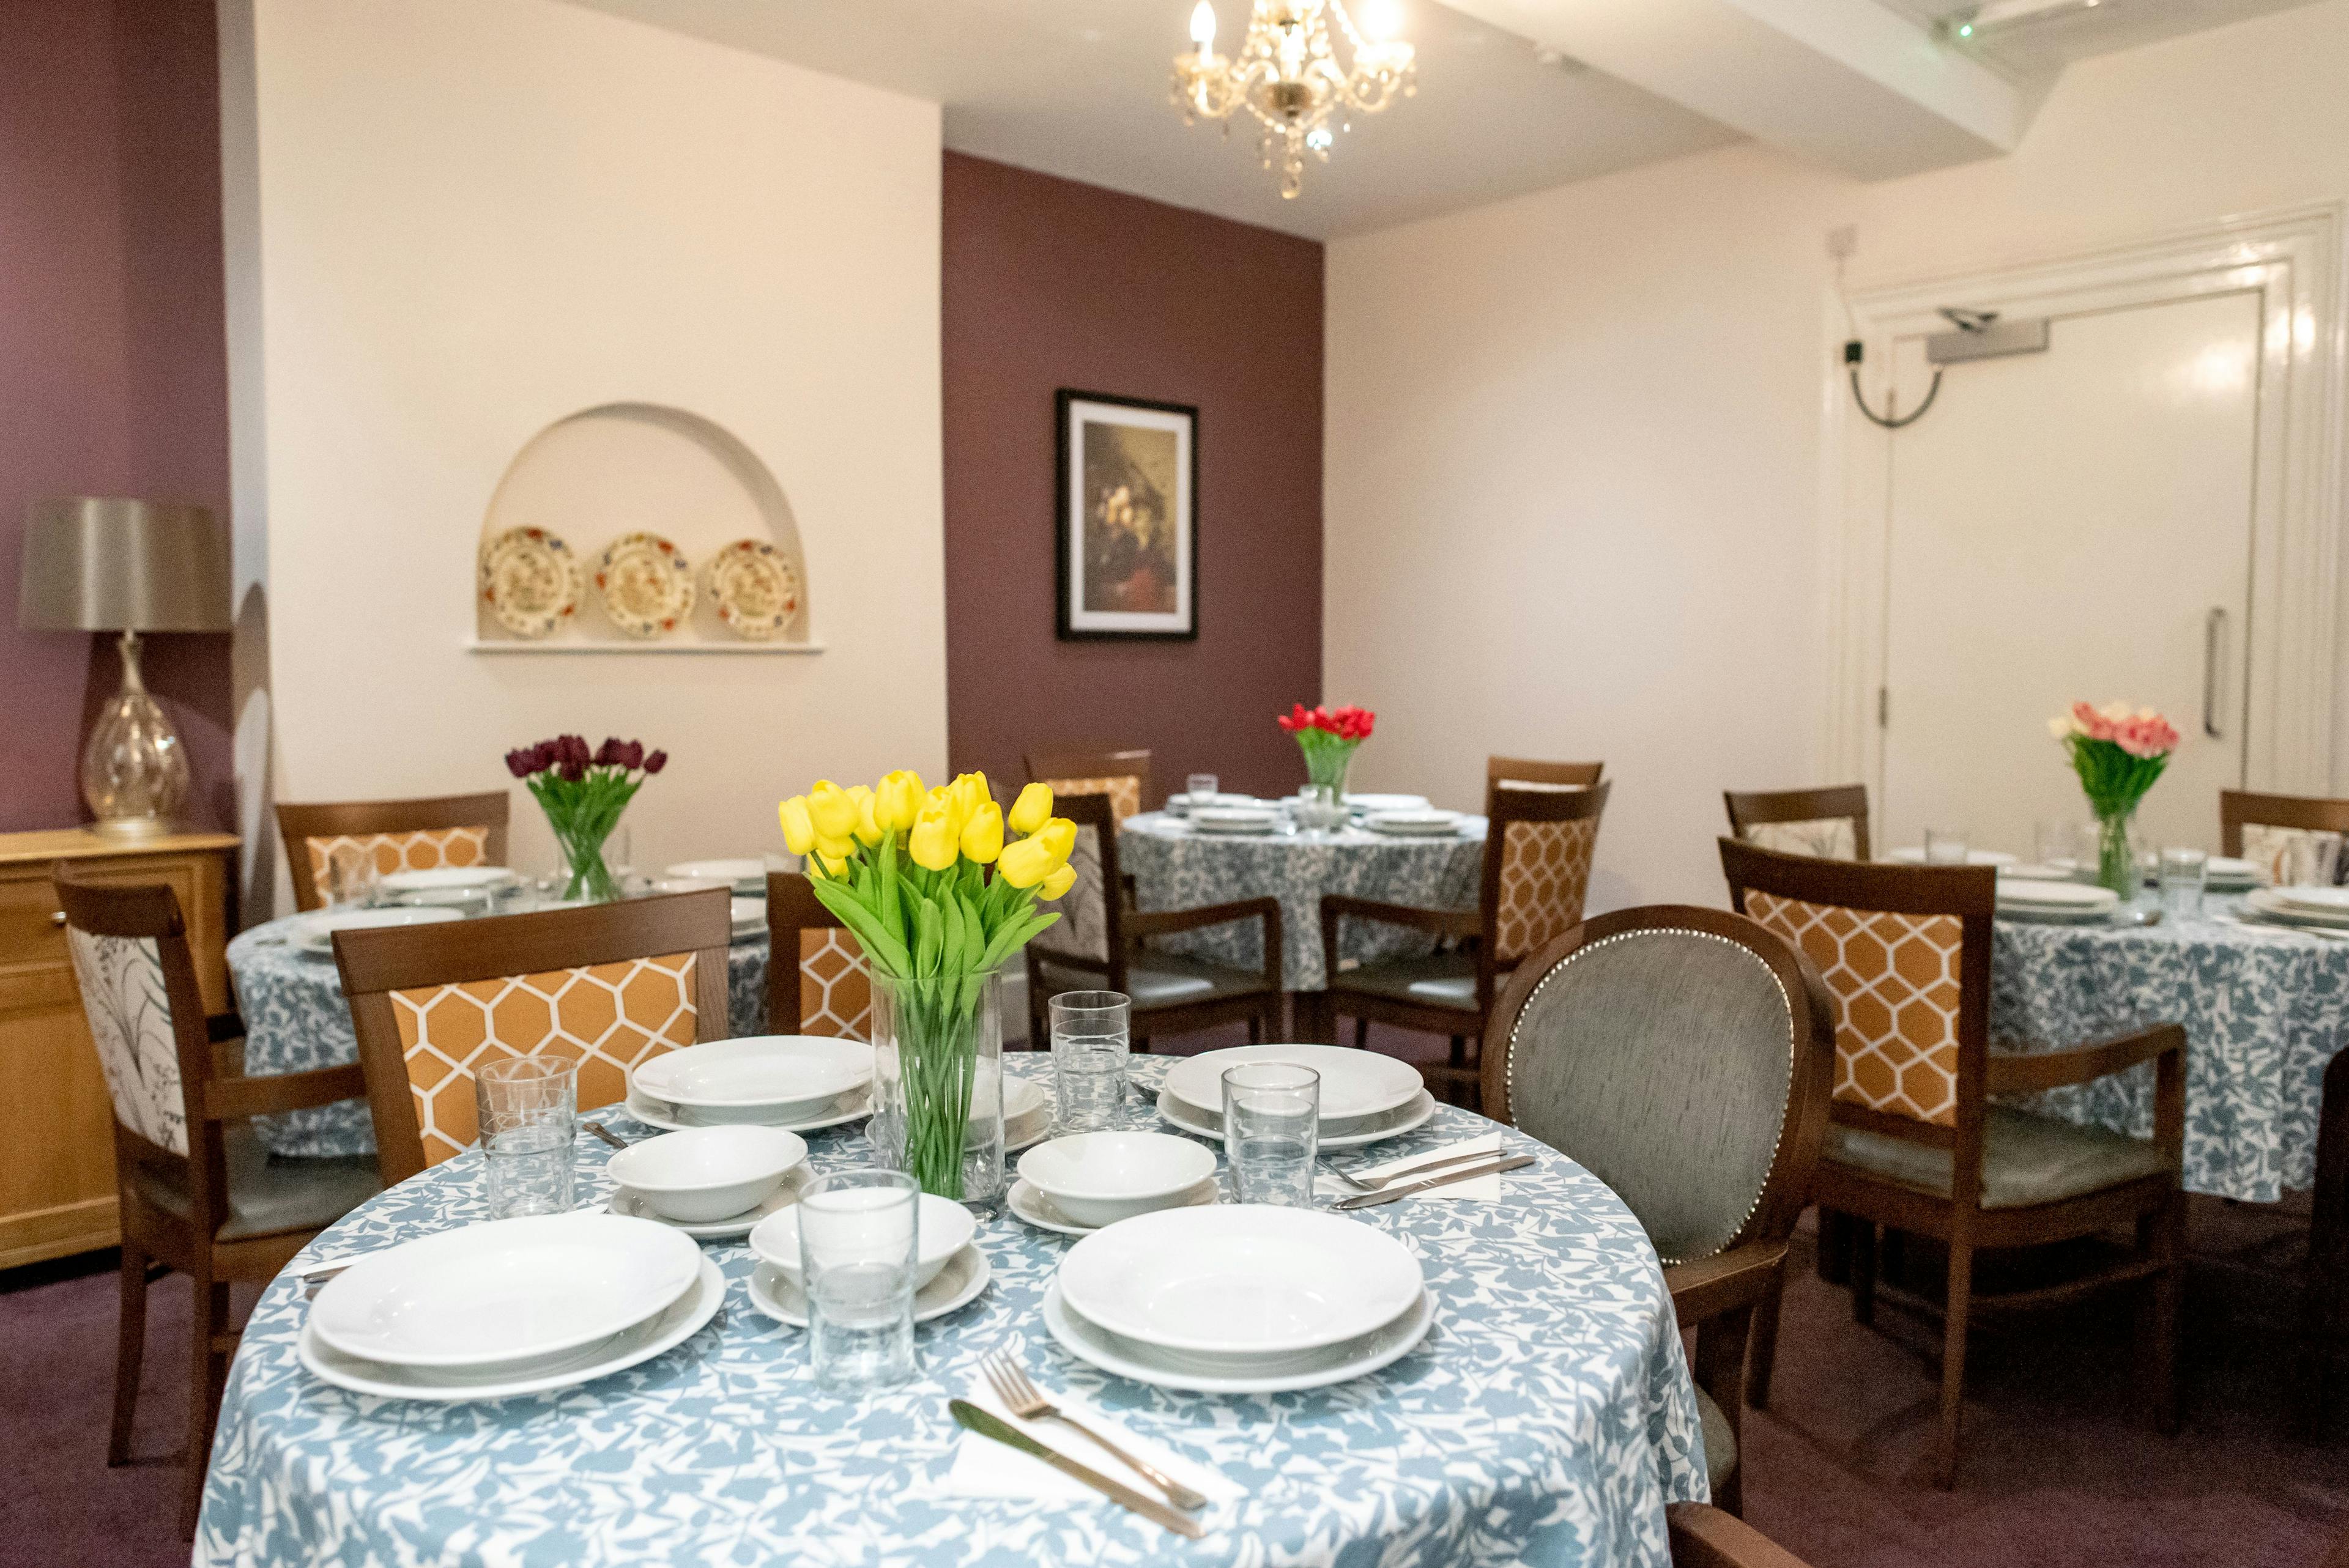 Dining room at Cedars House Care Home in Halstead, Braintree